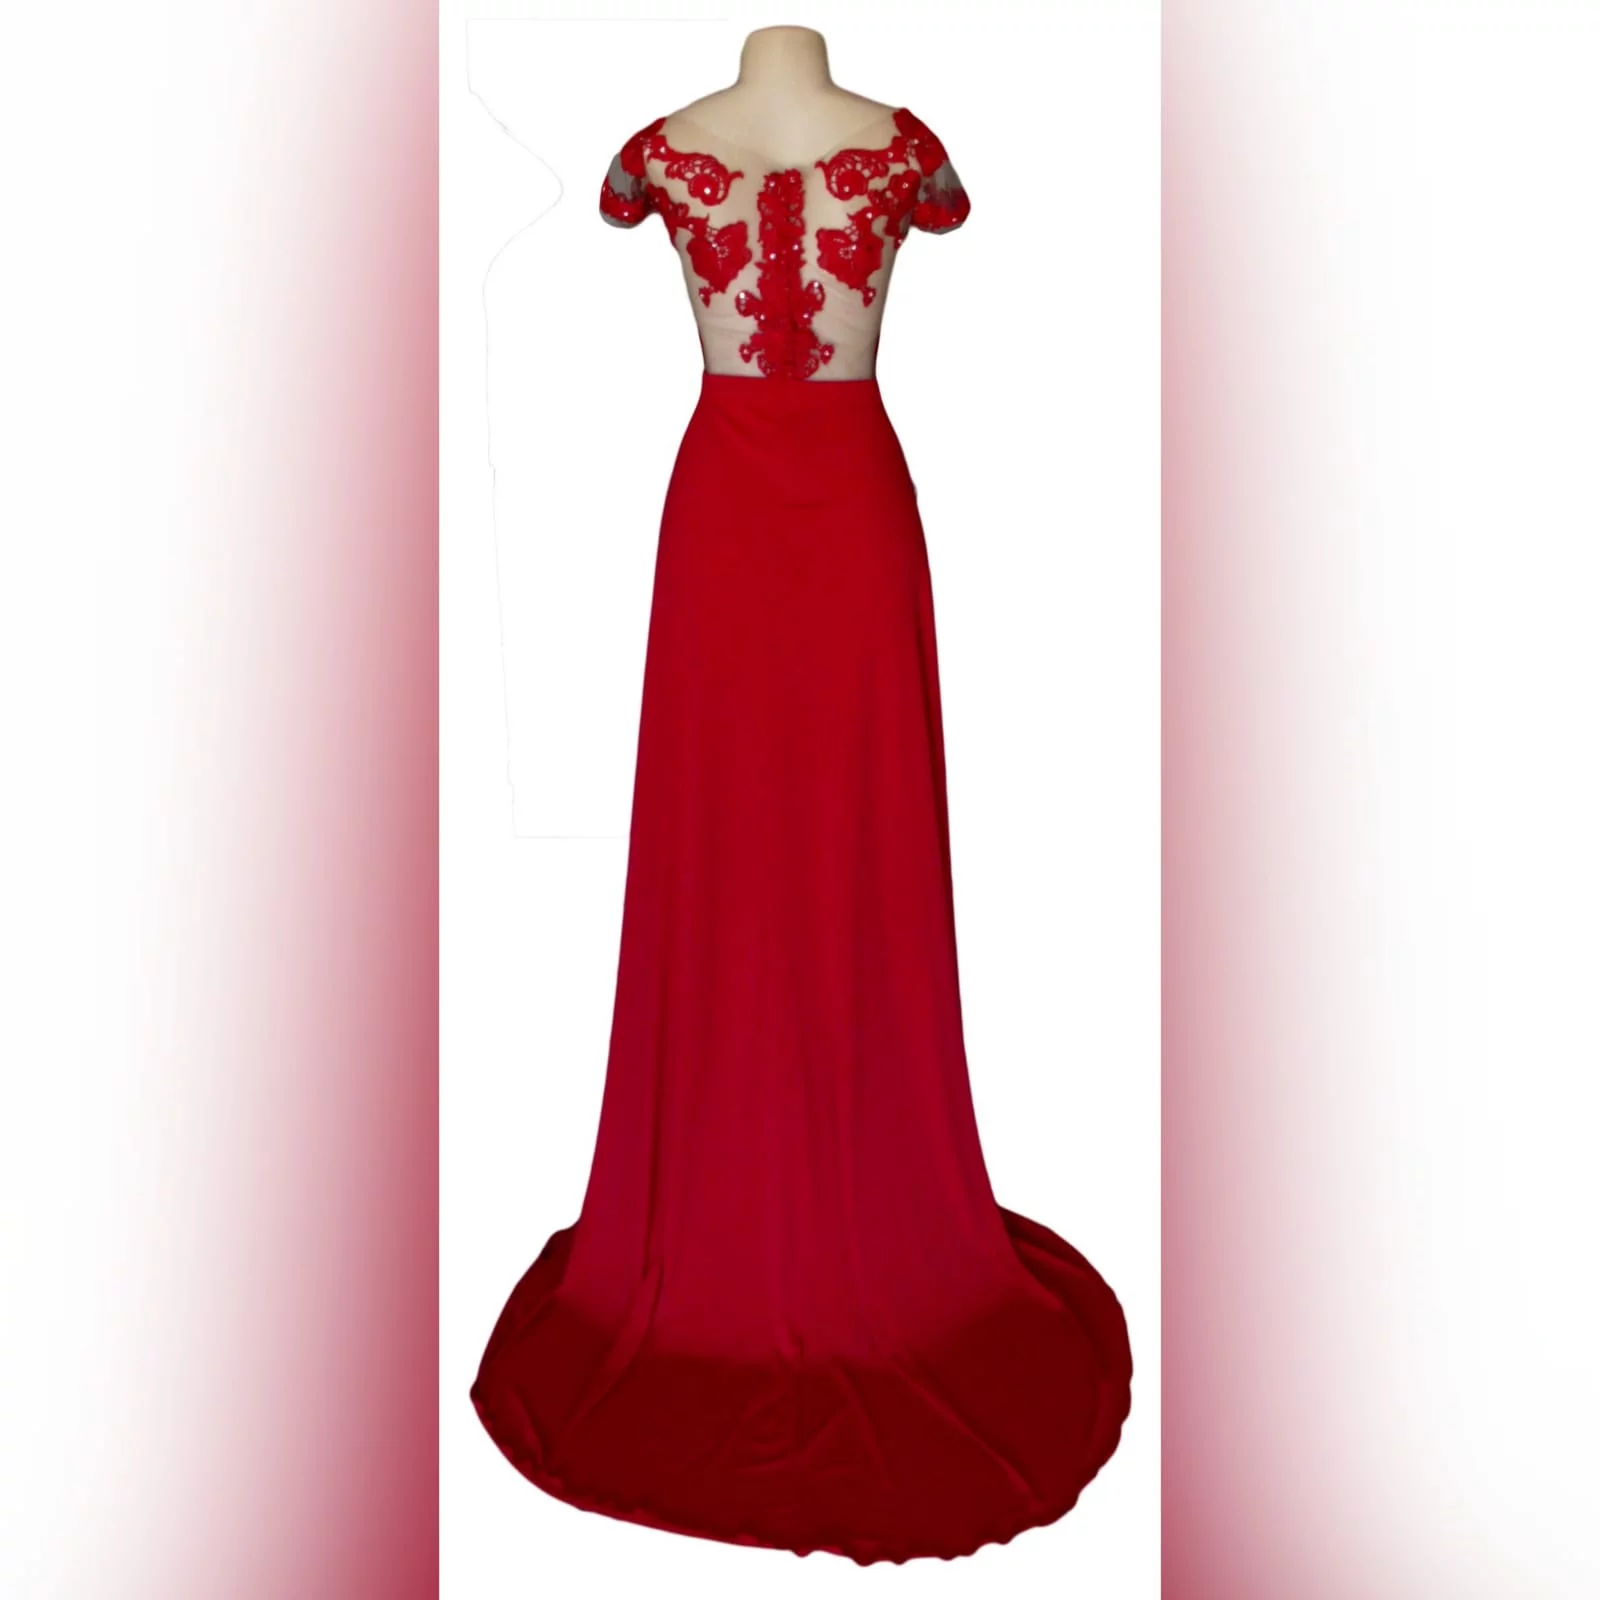 Red flowy lace bodice prom dress 4 red flowy lace bodice prom dress. With an illusion lace bodice detailed with silver beads and buttons. Evening dress with a slit and a train.